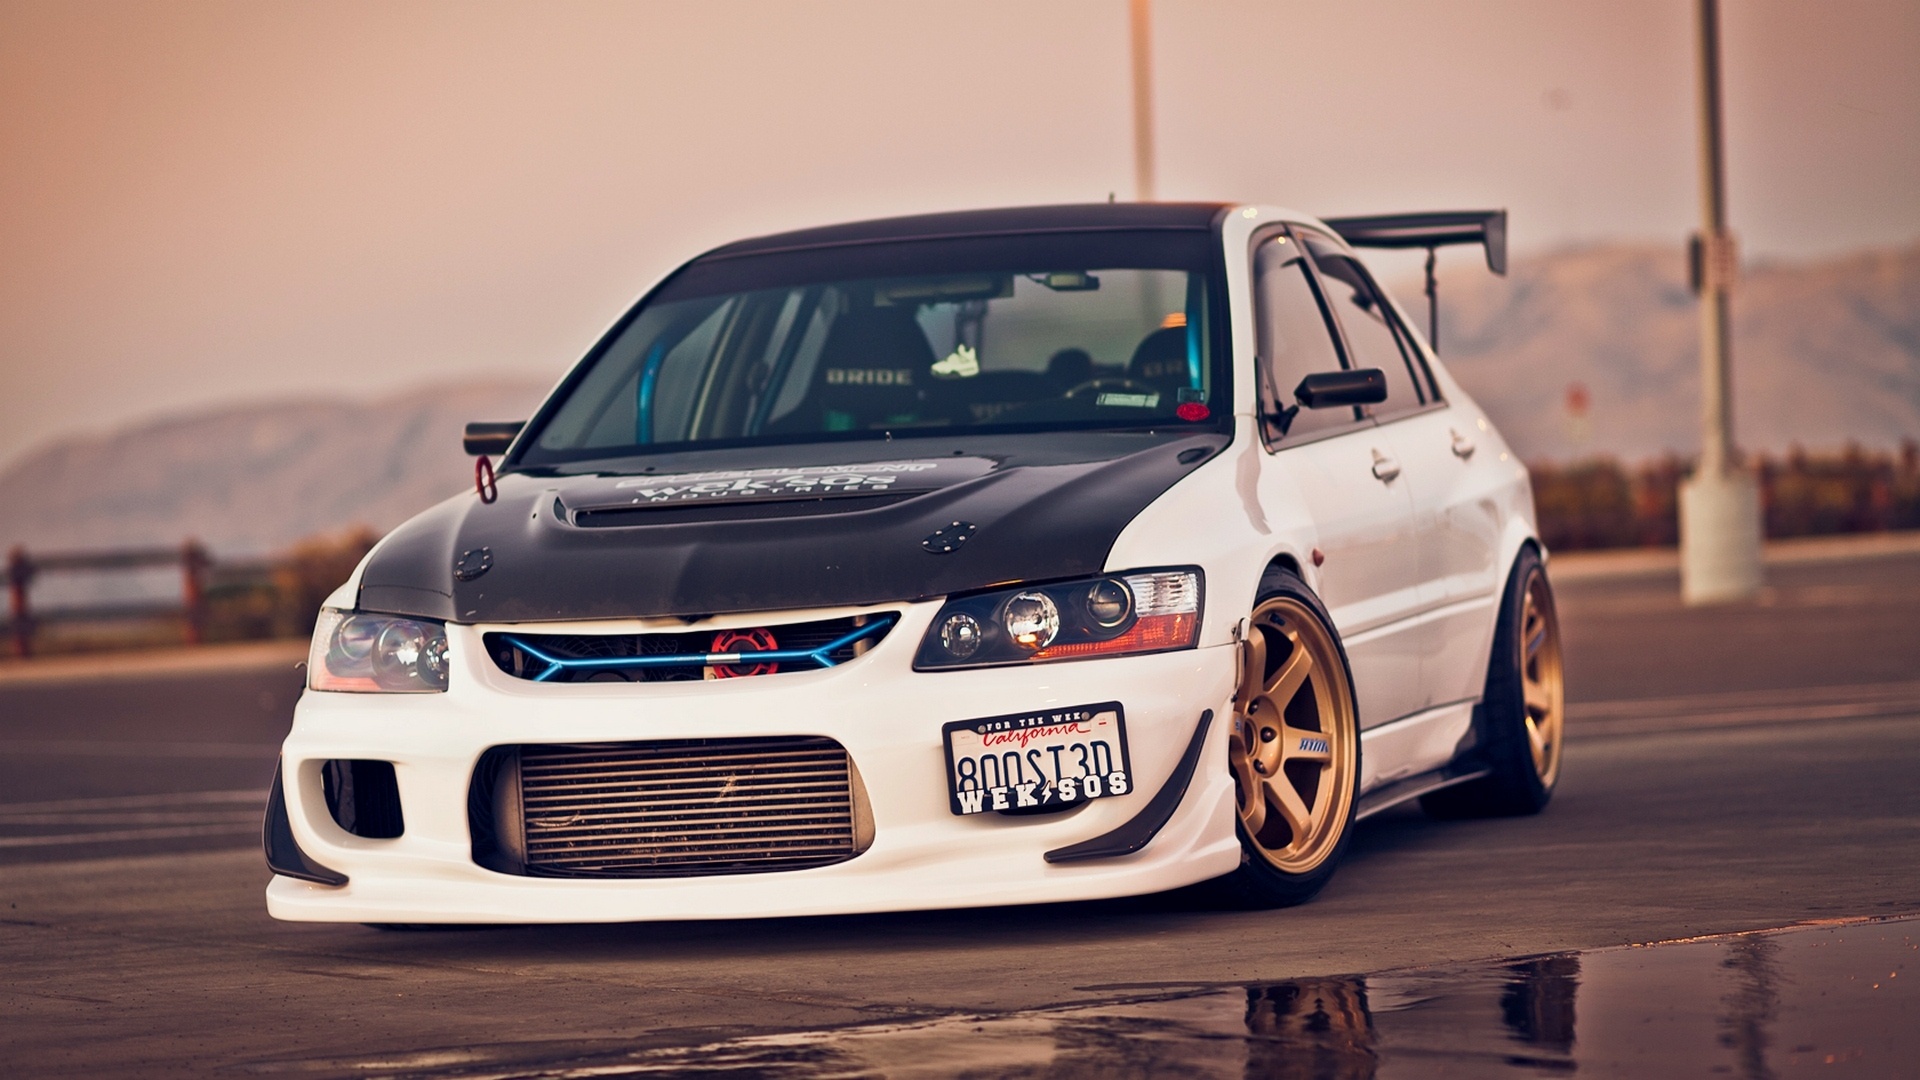 Evo Wallpaper Sale, Discounted price, Limited time, High-resolution, 1920x1080 Full HD Desktop